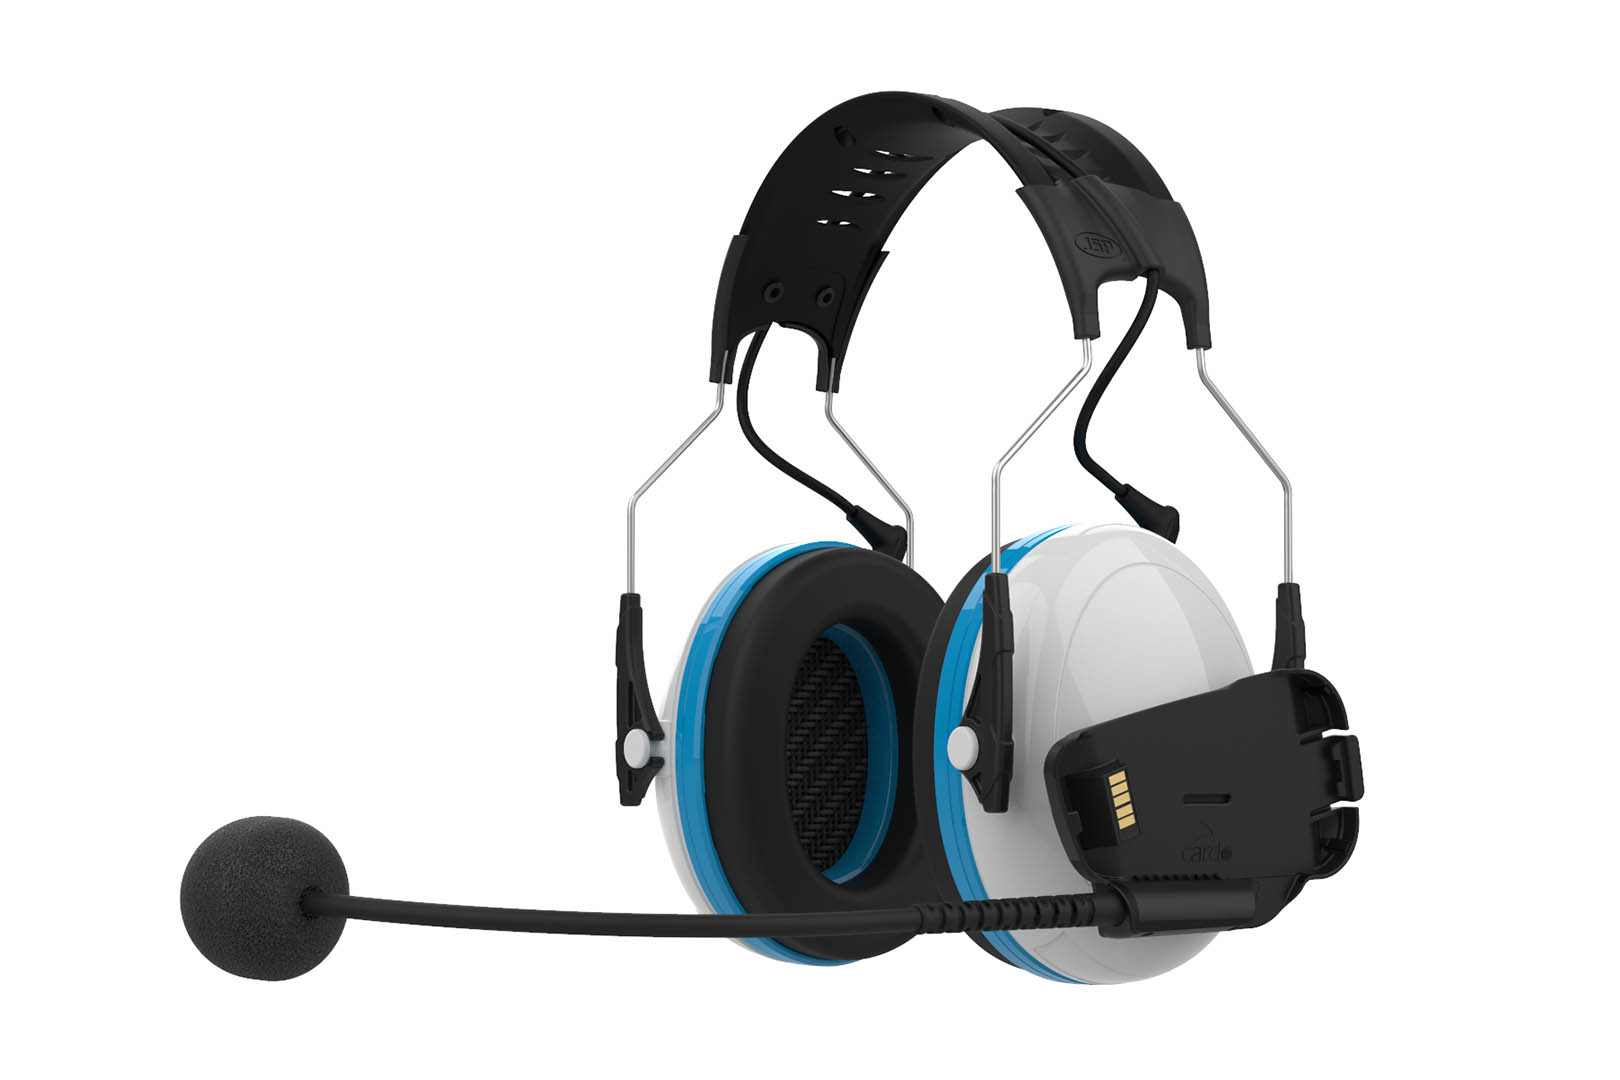 A view of the Cardo System Packtalk headphones, complete with comm unit cradle